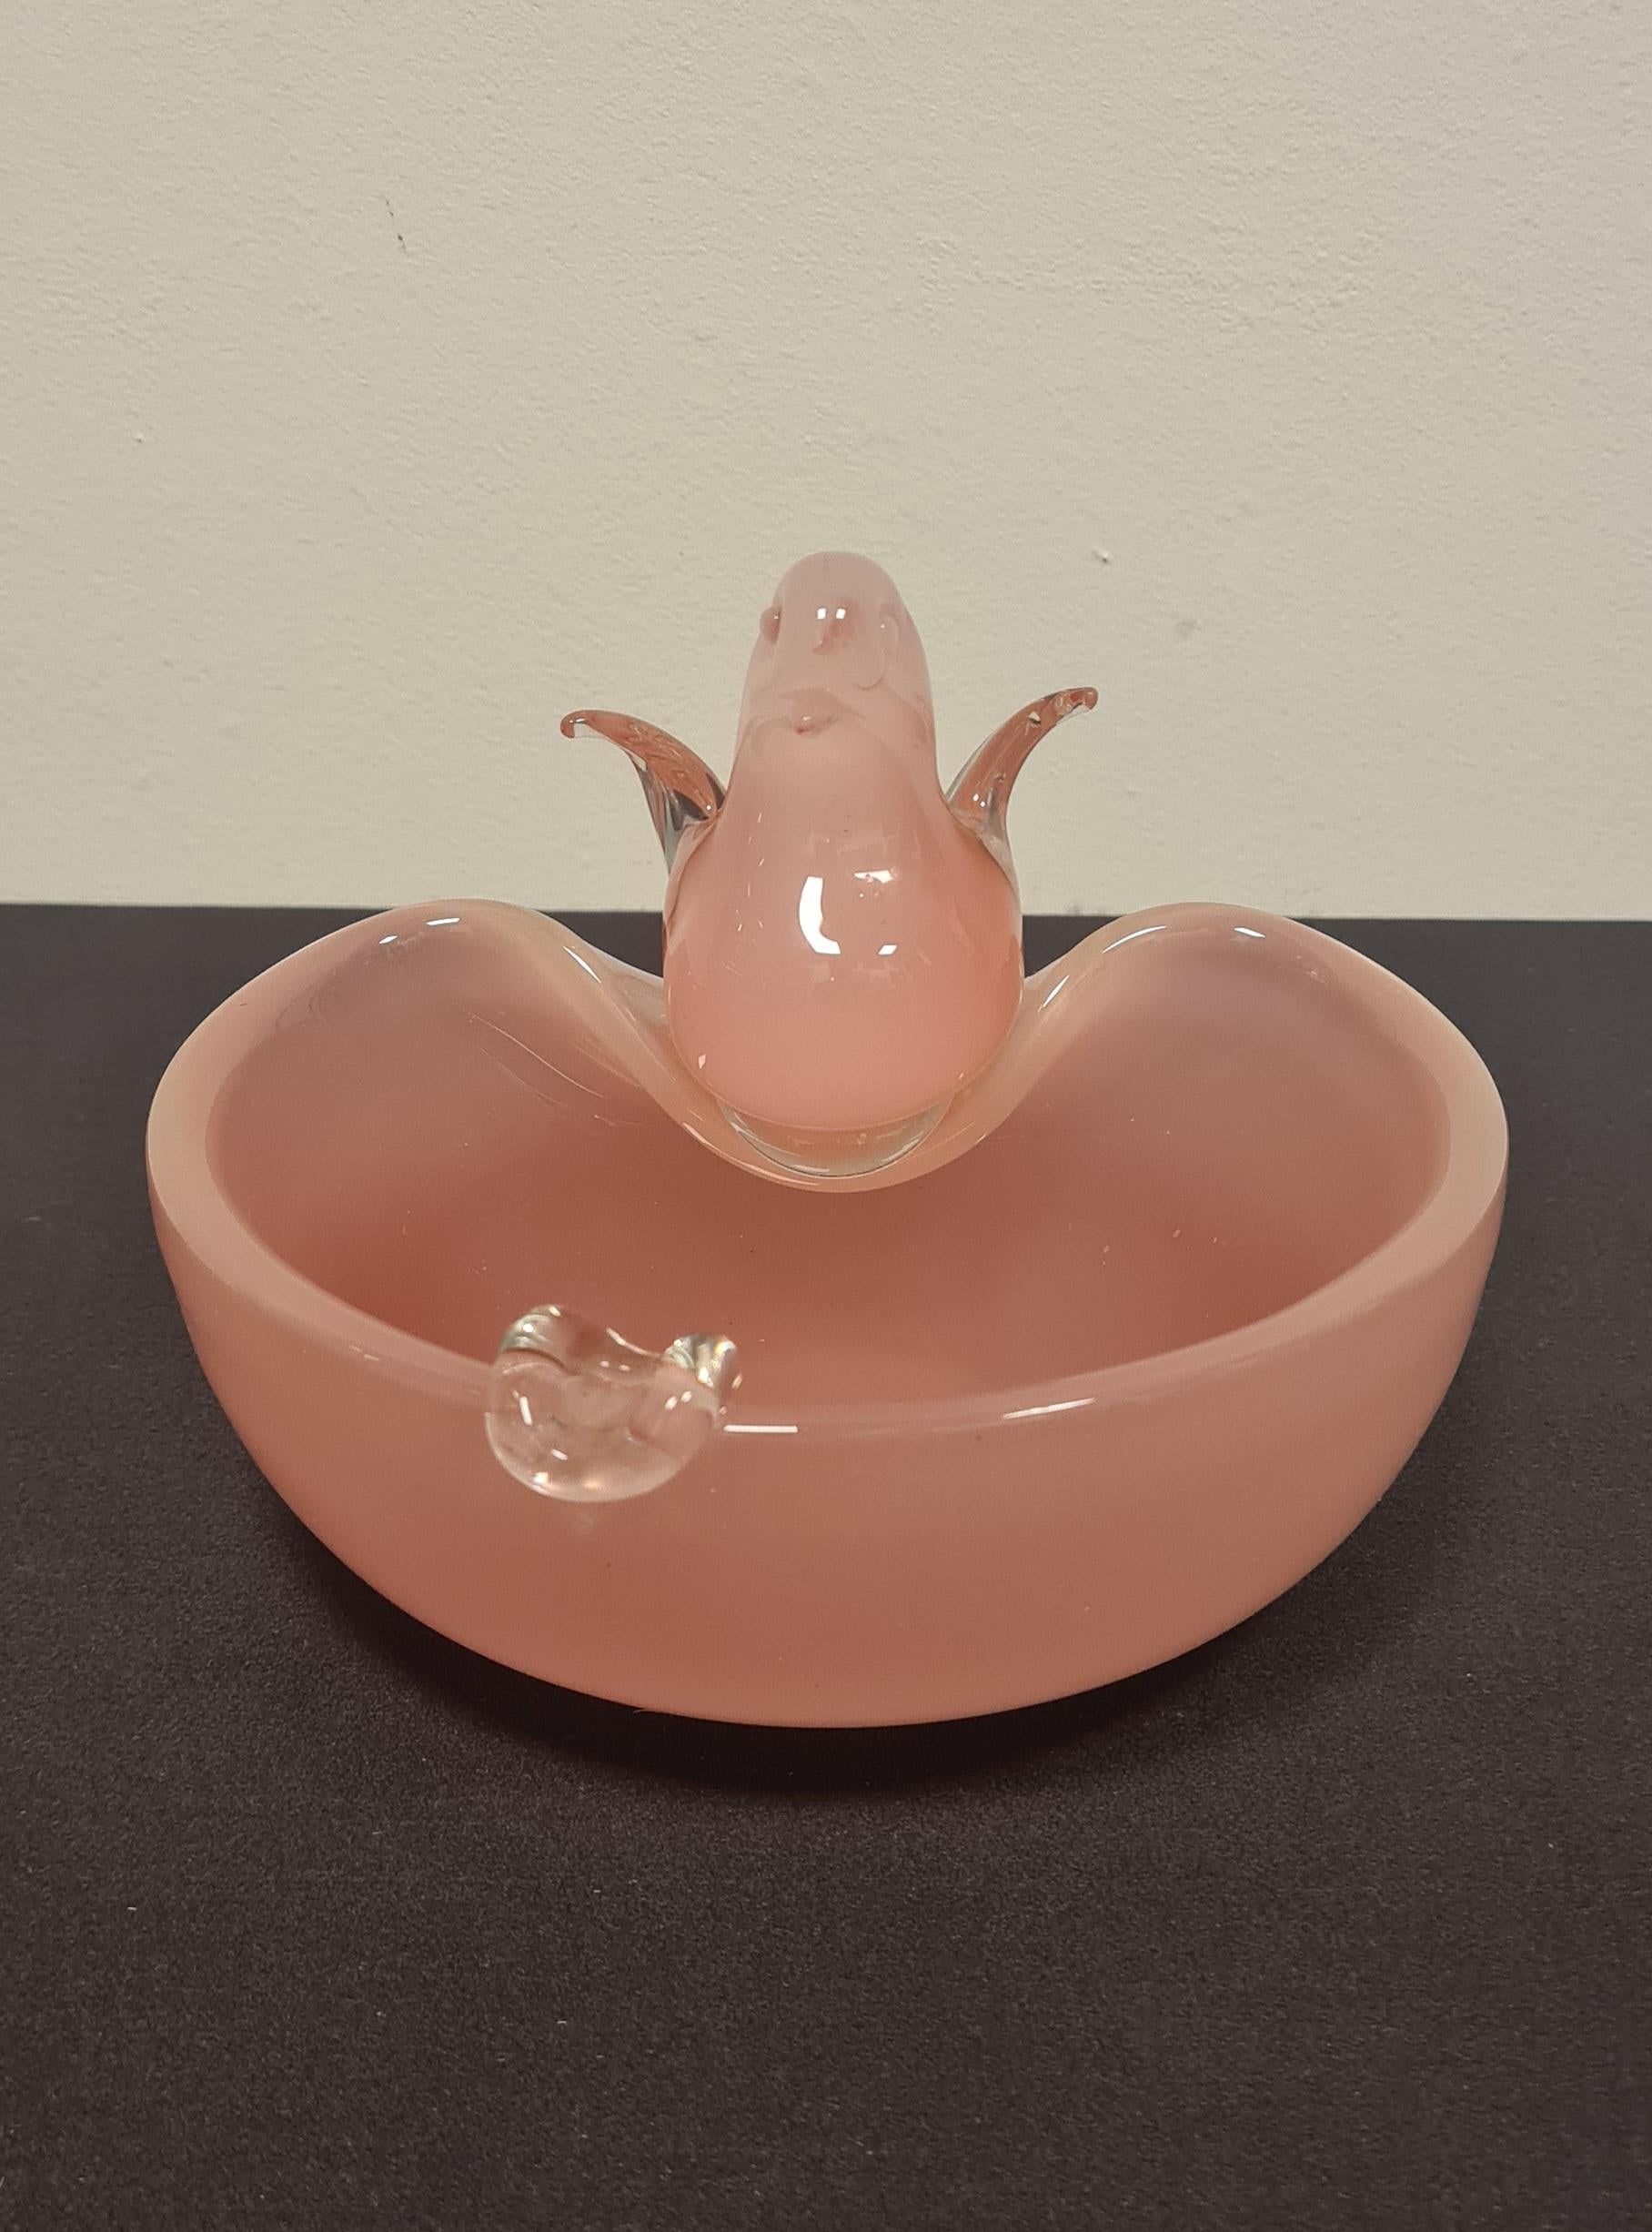 Murano glass ashtray attributed to Archimedes Seguso.

Delicate pink opalescent glass ashtray.

Consisting of a bowl on which a small bird is lying.

Attributable to Archimedes Seguso's glassworks because of the type of workmanship.

In addition to